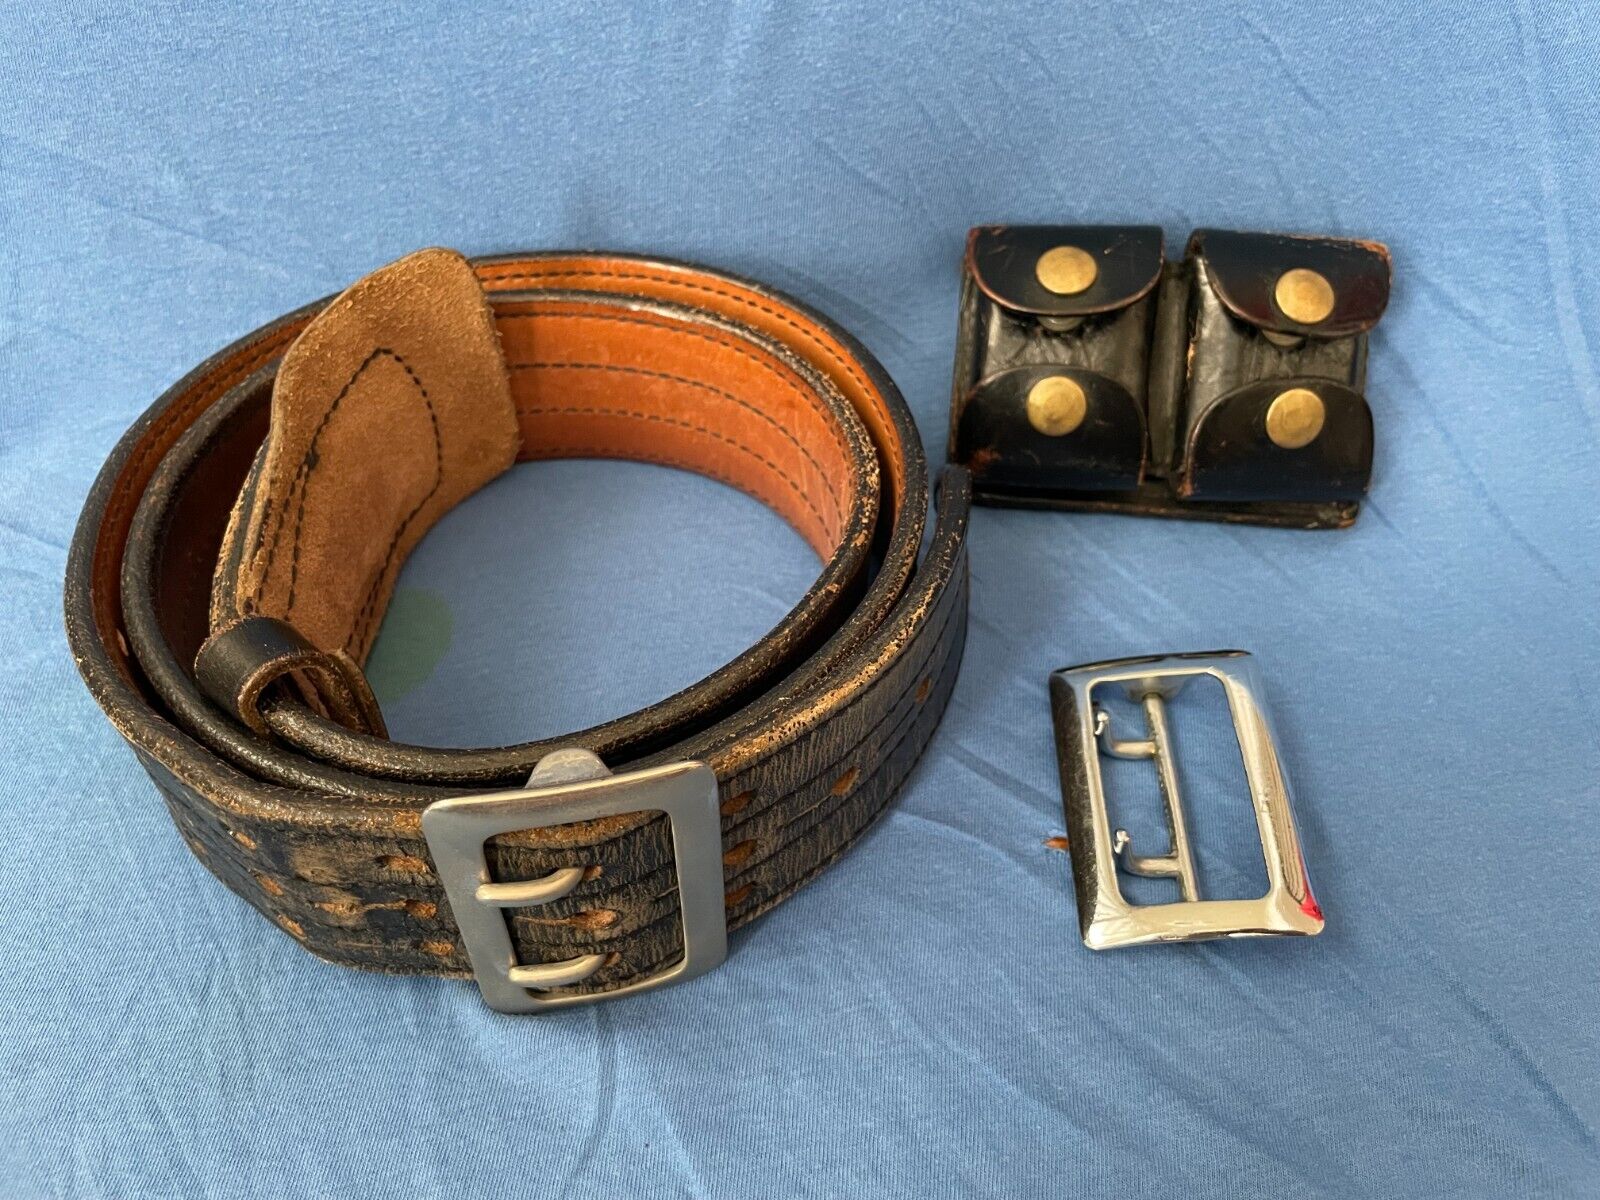 Vtg DETROIT POLICE DEPARTMENT Leather Service Belt, Buckles, Ammo Pouch Jay-Pee